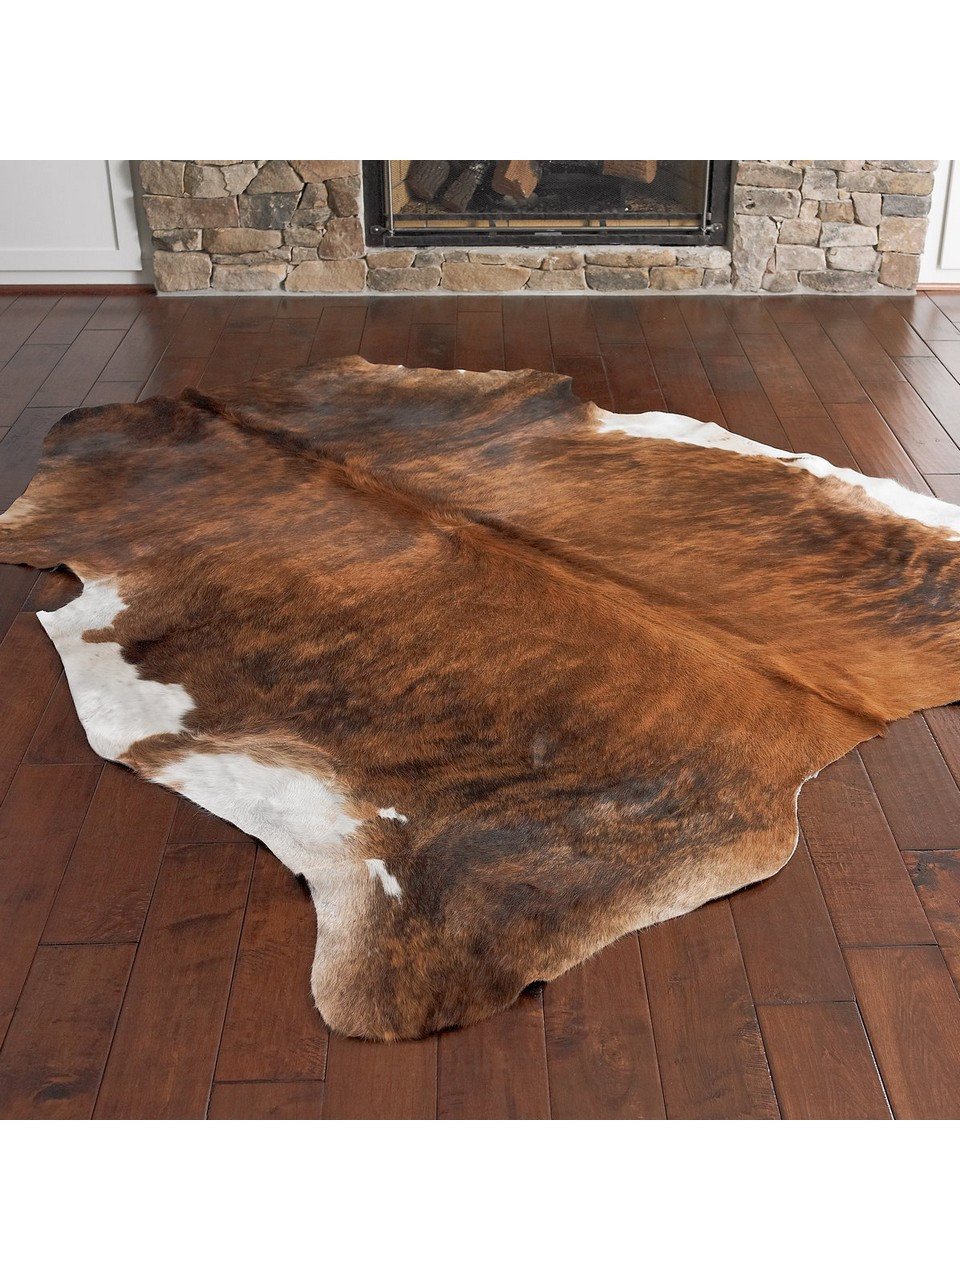 https://cdn11.bigcommerce.com/s-t1n43taf3i/images/stencil/1280x1280/products/35675/143248/Extra-Large-Cowhide-Rugs__S_1__45964.1645574115.jpg?c=2